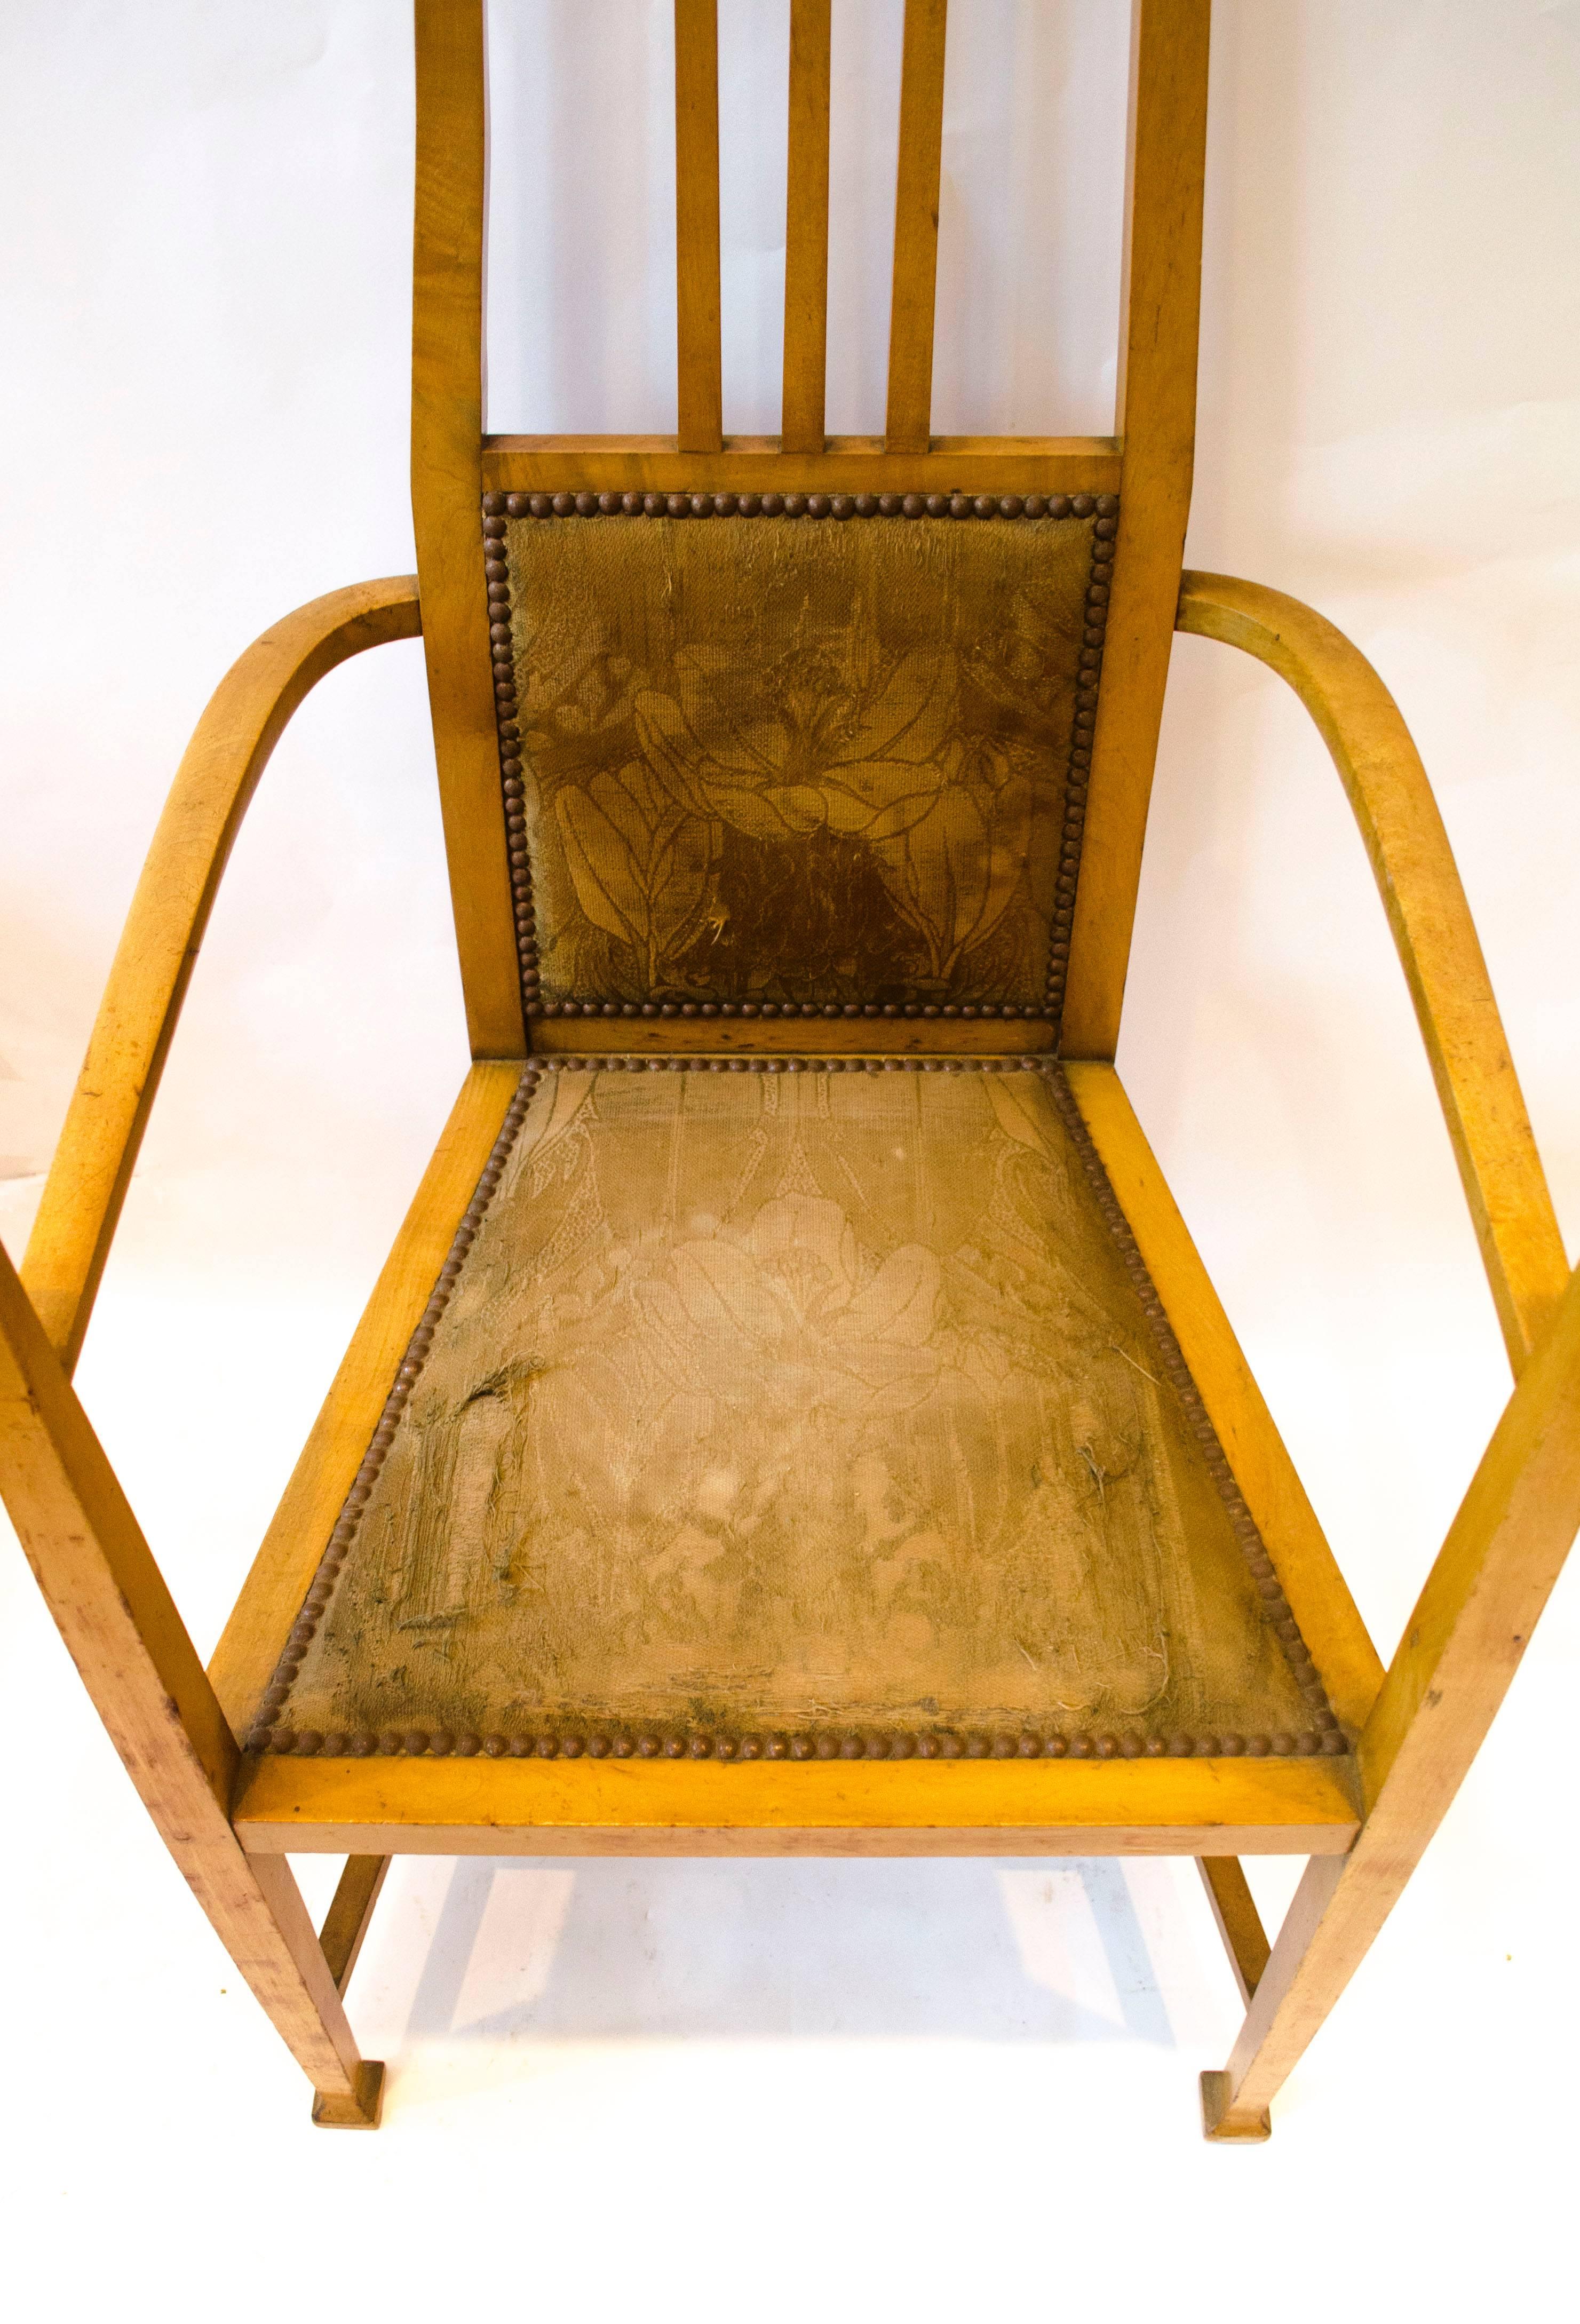 20th Century G M Ellwood for J S Henry. A Rare Satin Birch Arts and Crafts inlaid Armchair.